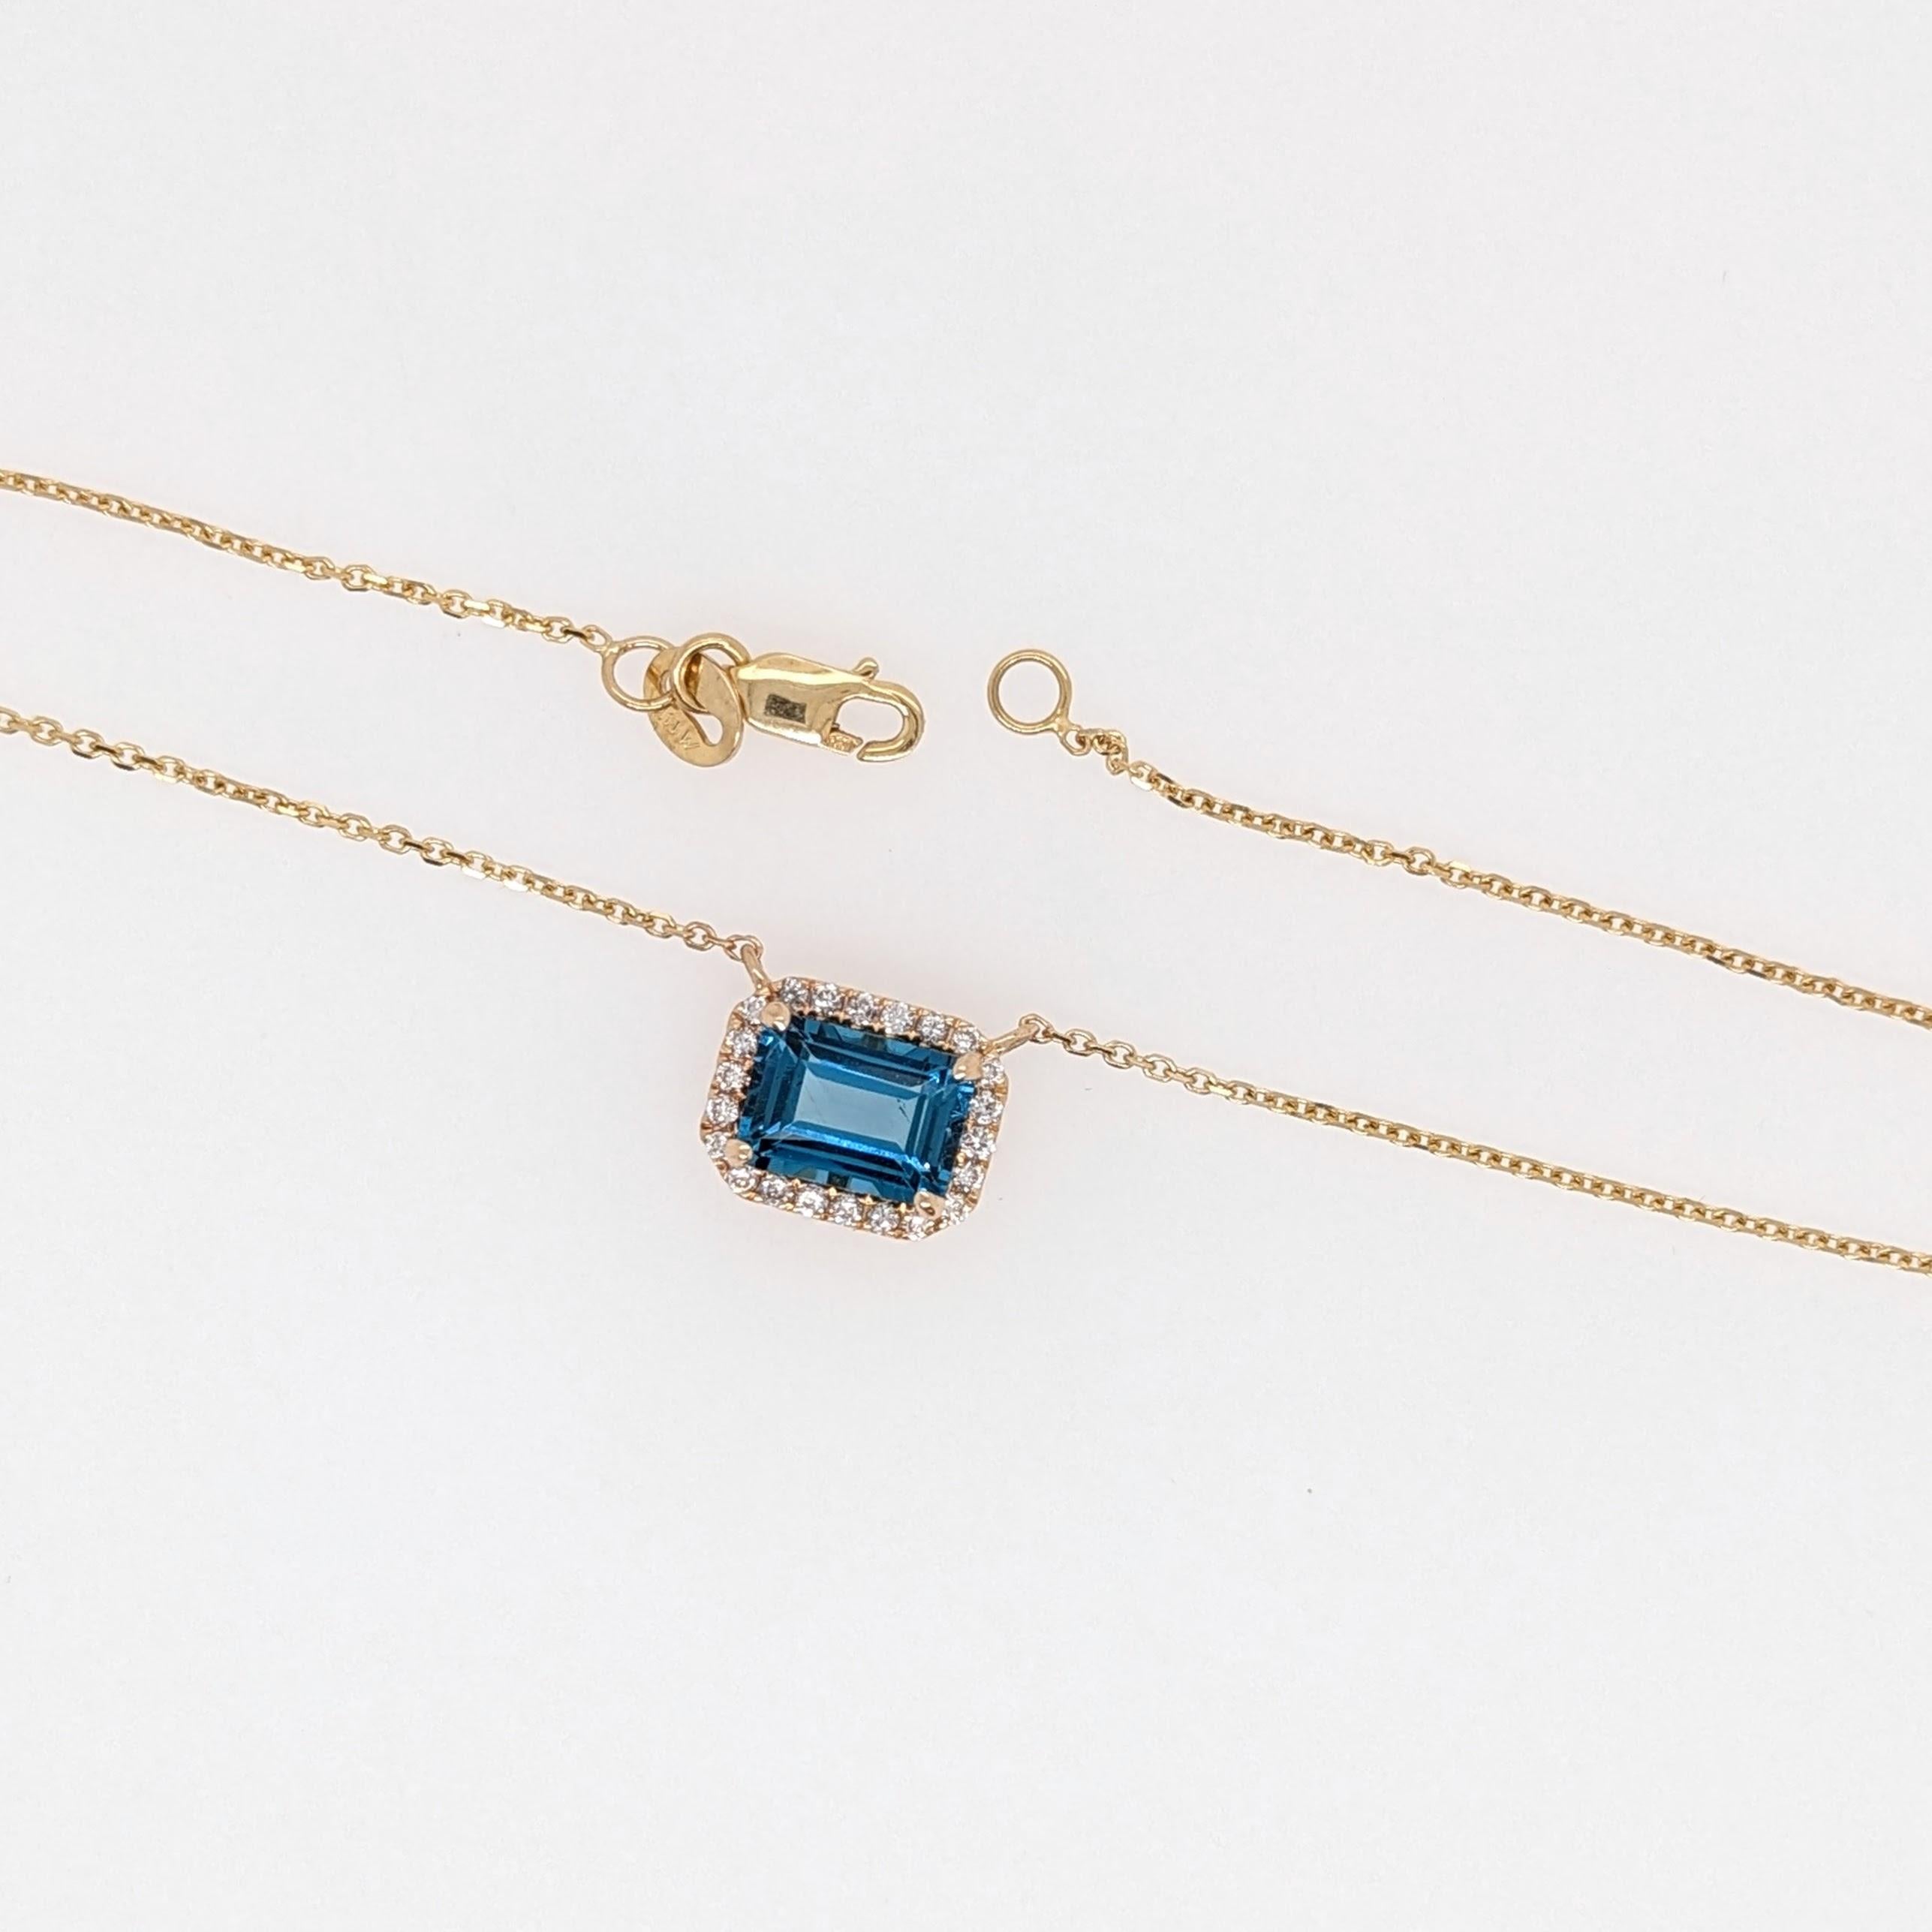 This classic NNJ necklace design features an emerald cut 7x5mm London blue topaz with a stunning halo of earth-mined diamonds. This necklace is available in a variety of gemstones, and totally customizable!

Perfect for gifts, anniversaries, or any